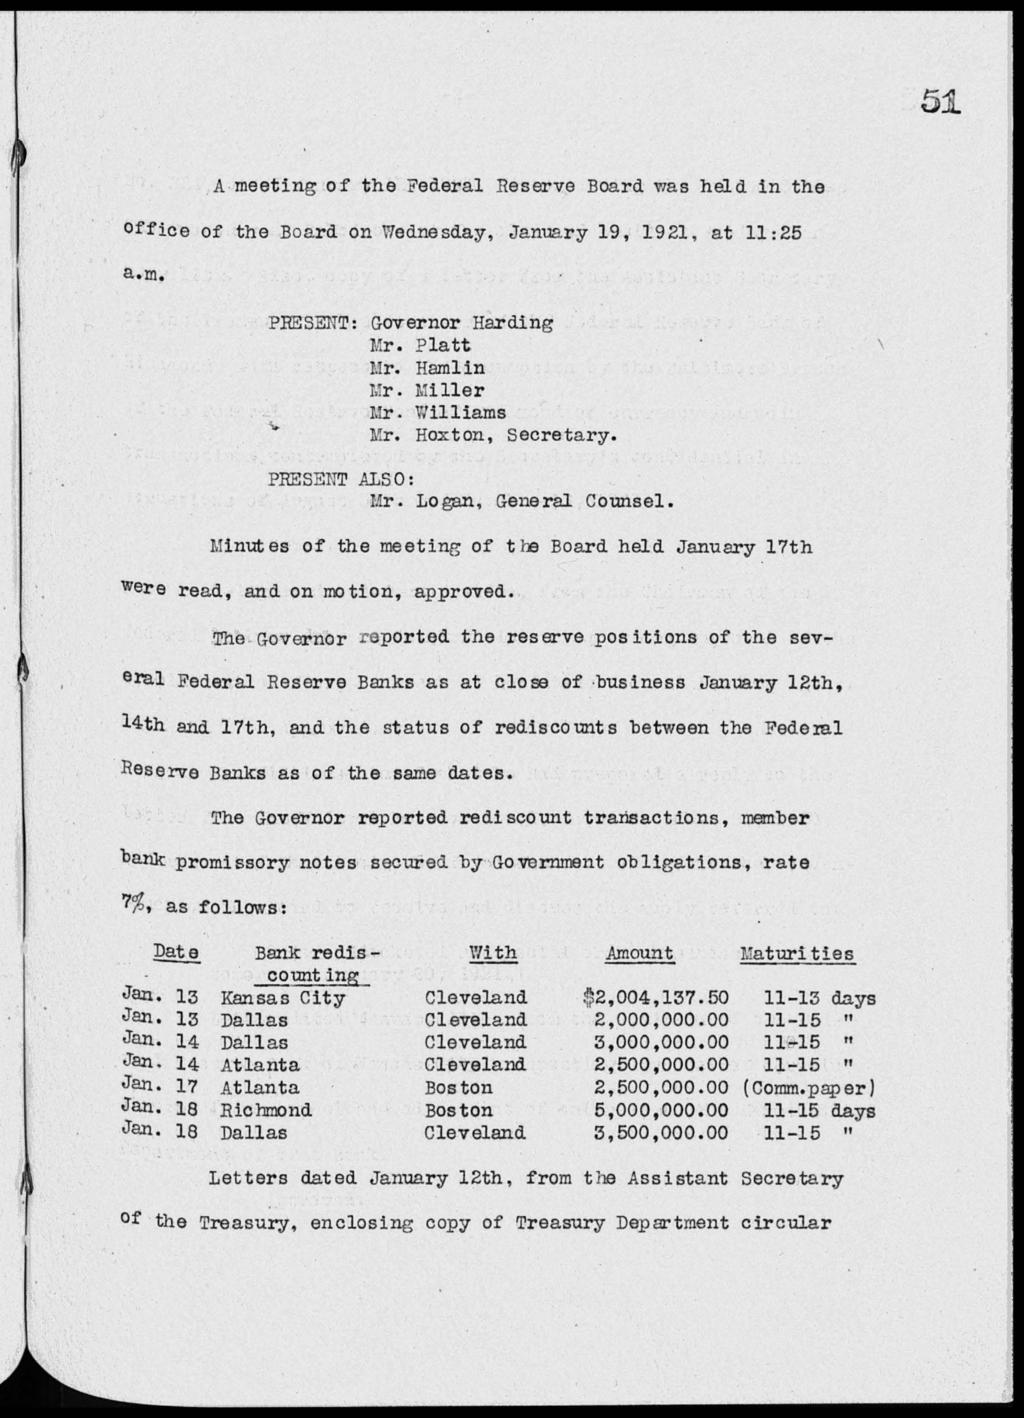 51 A meeting of the Federal Reserve Board was held in the Office of the Board on Wednesday, January 19, 1921, at 11:25 a.m. PIESENT: Governor Harding Mr. Platt Mr. Hamlin Mr. Miller Mr. Williams Mr.